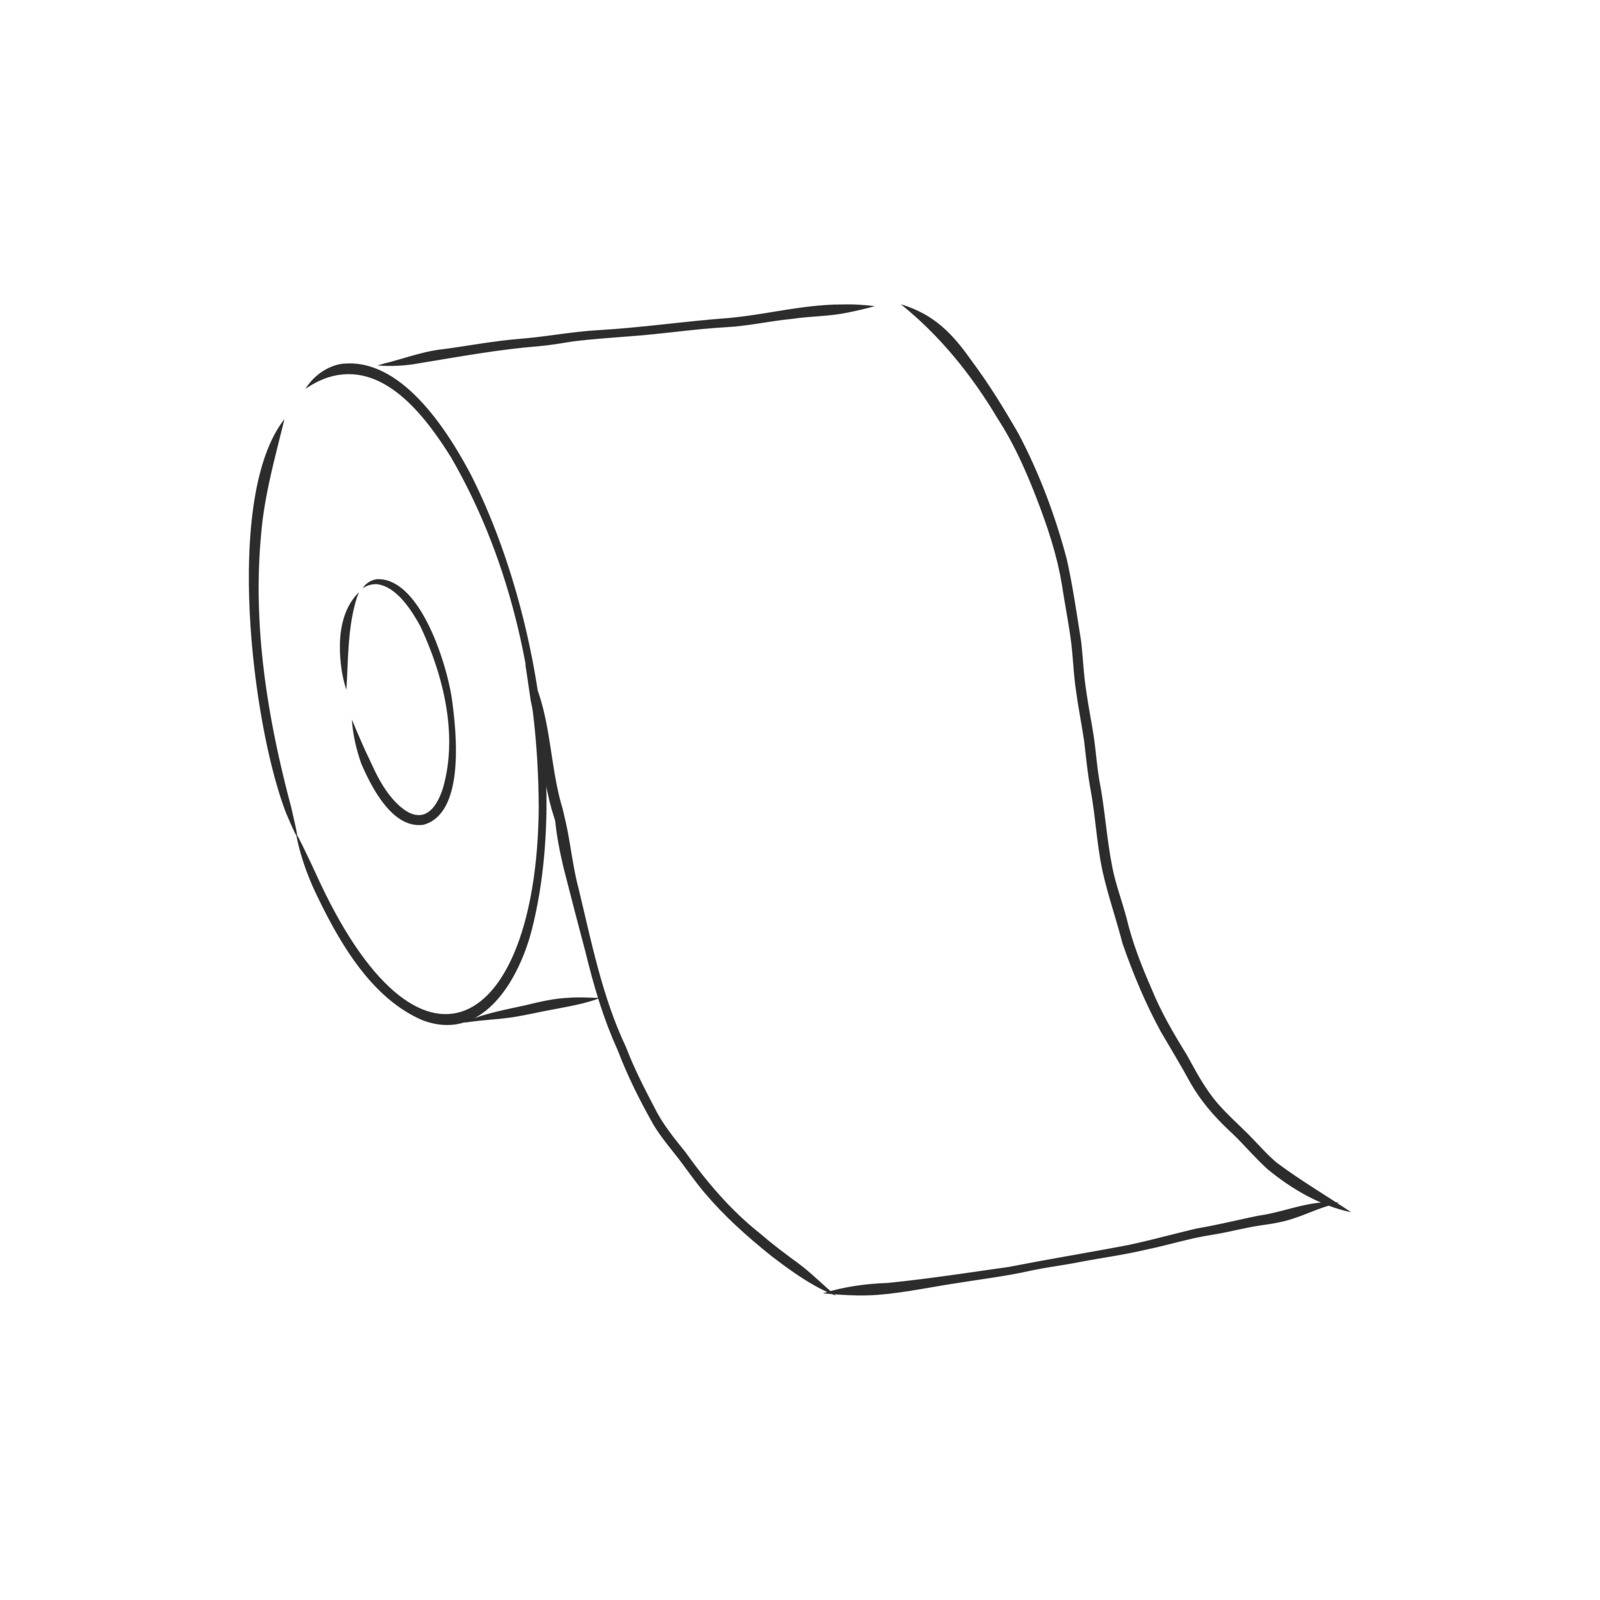 Toilet Paper Roll. toilet paper vector sketch illustration by ekaterina